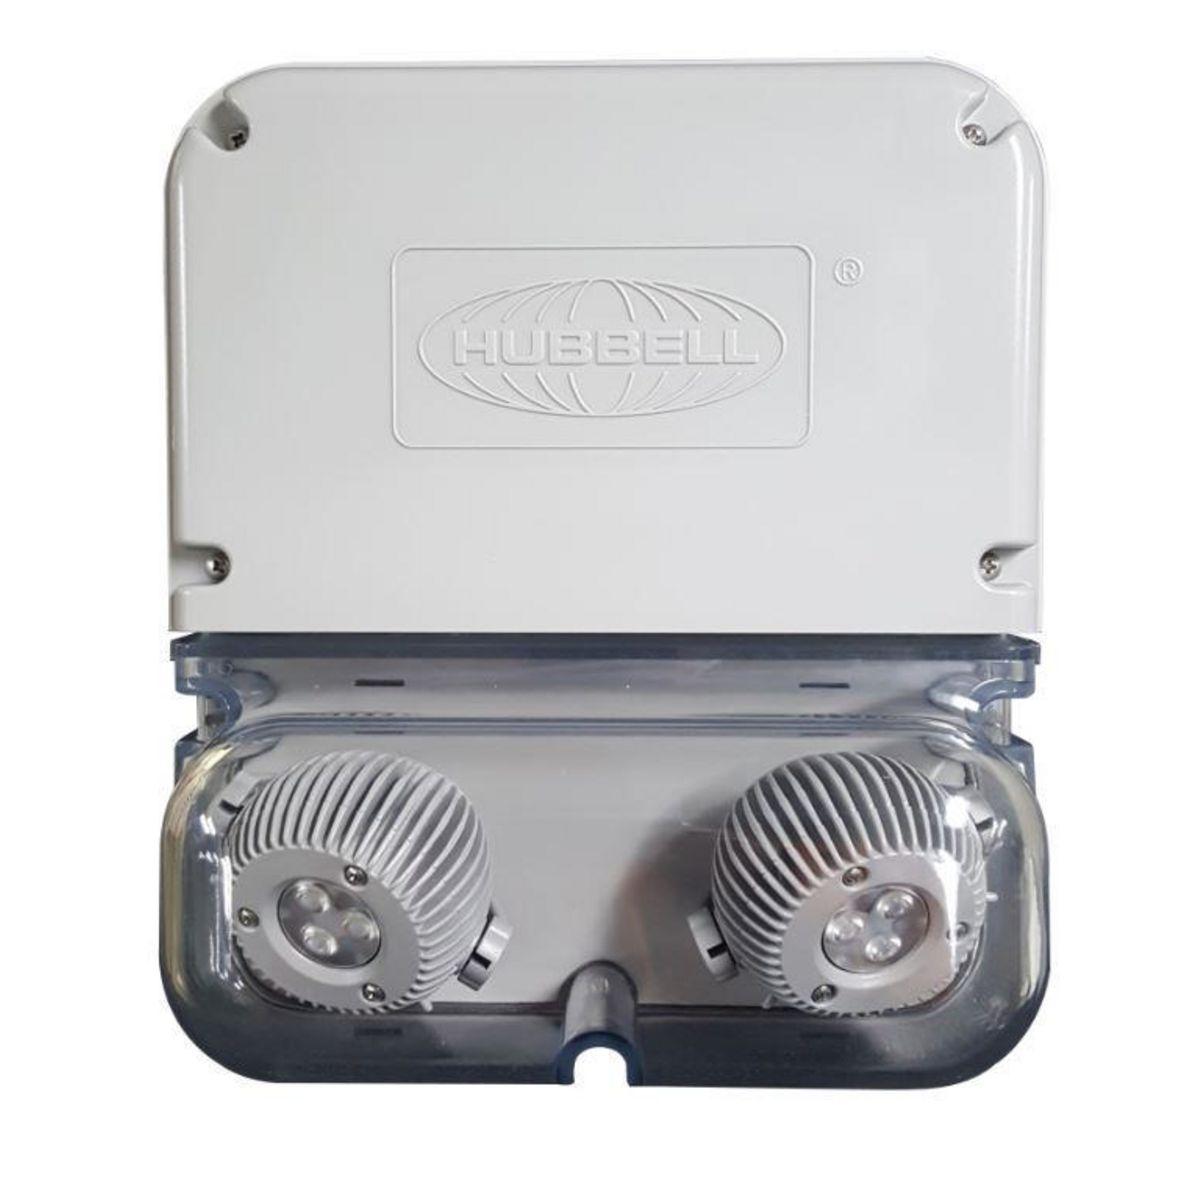 Hubbell NEBS12-C2D1-06L NEBS Series 12 Watt Capacity Class 2 Division 1 Rated Emergency Light Unit With 6 Watt Heads  ; Provides the same level of lumen output with no light degradation for the full 90 minutes of battery discharge. ; Flame-rated, UV stable thermoplastic housing 